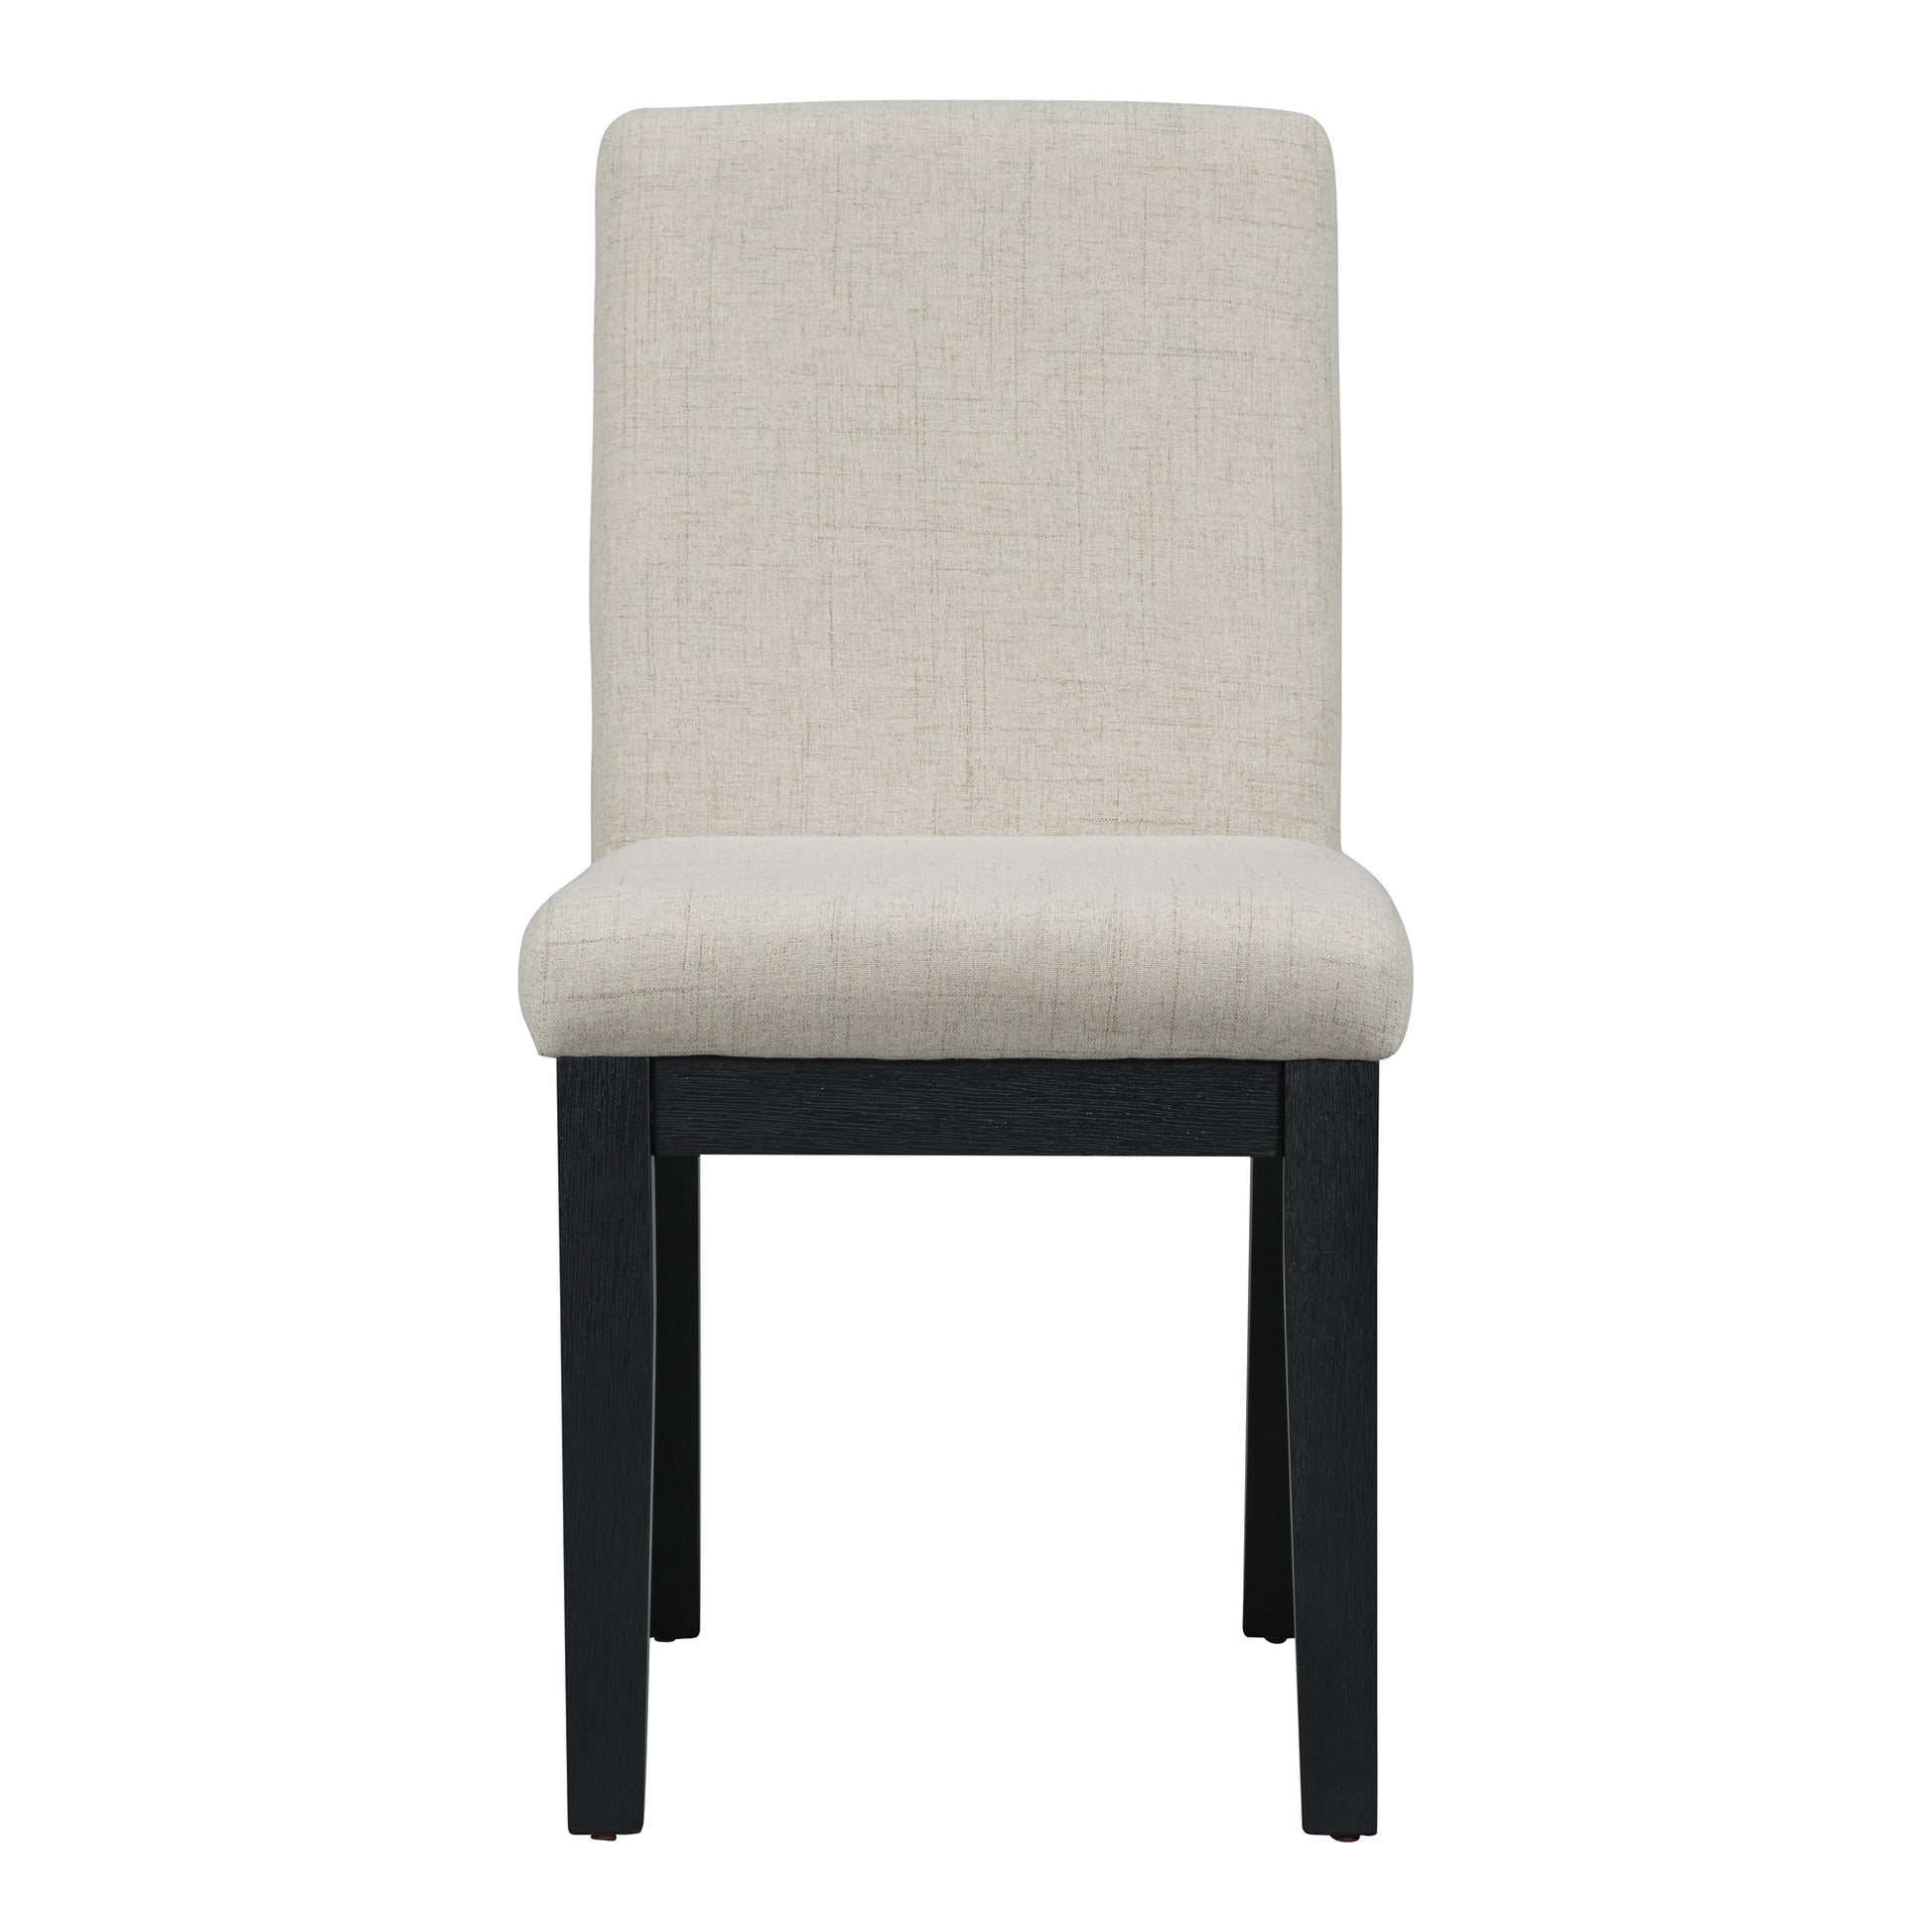 Simple and Modern 4 piece Upholstered Chairs with beige+black-rubber wood